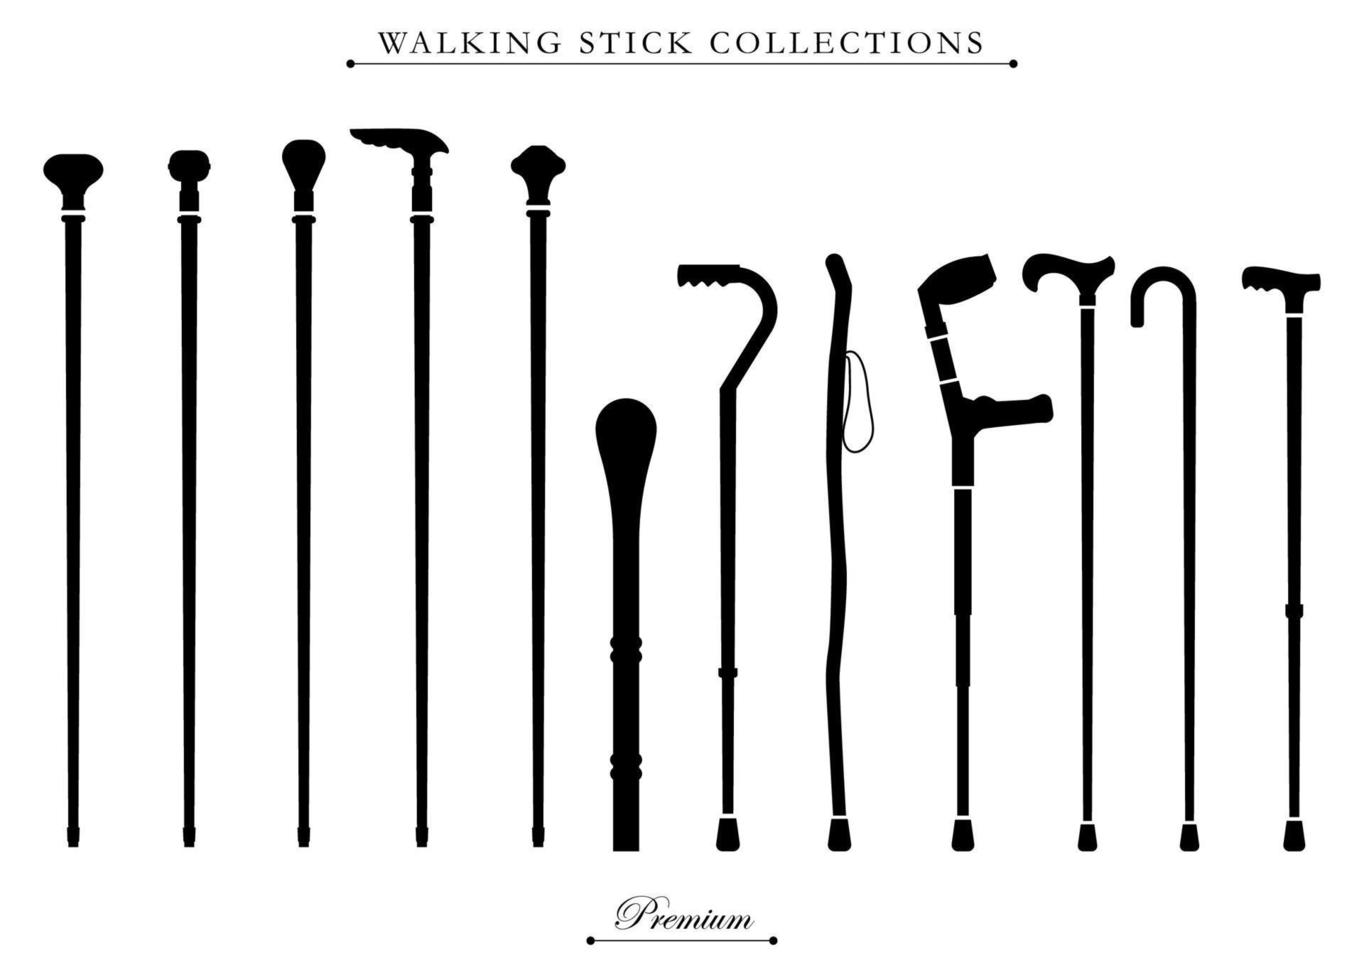 Walking stick collections illustration. Set of walking stick model and type. Fit for symbol, icon, logo, element bakcground. Vector eps 10.